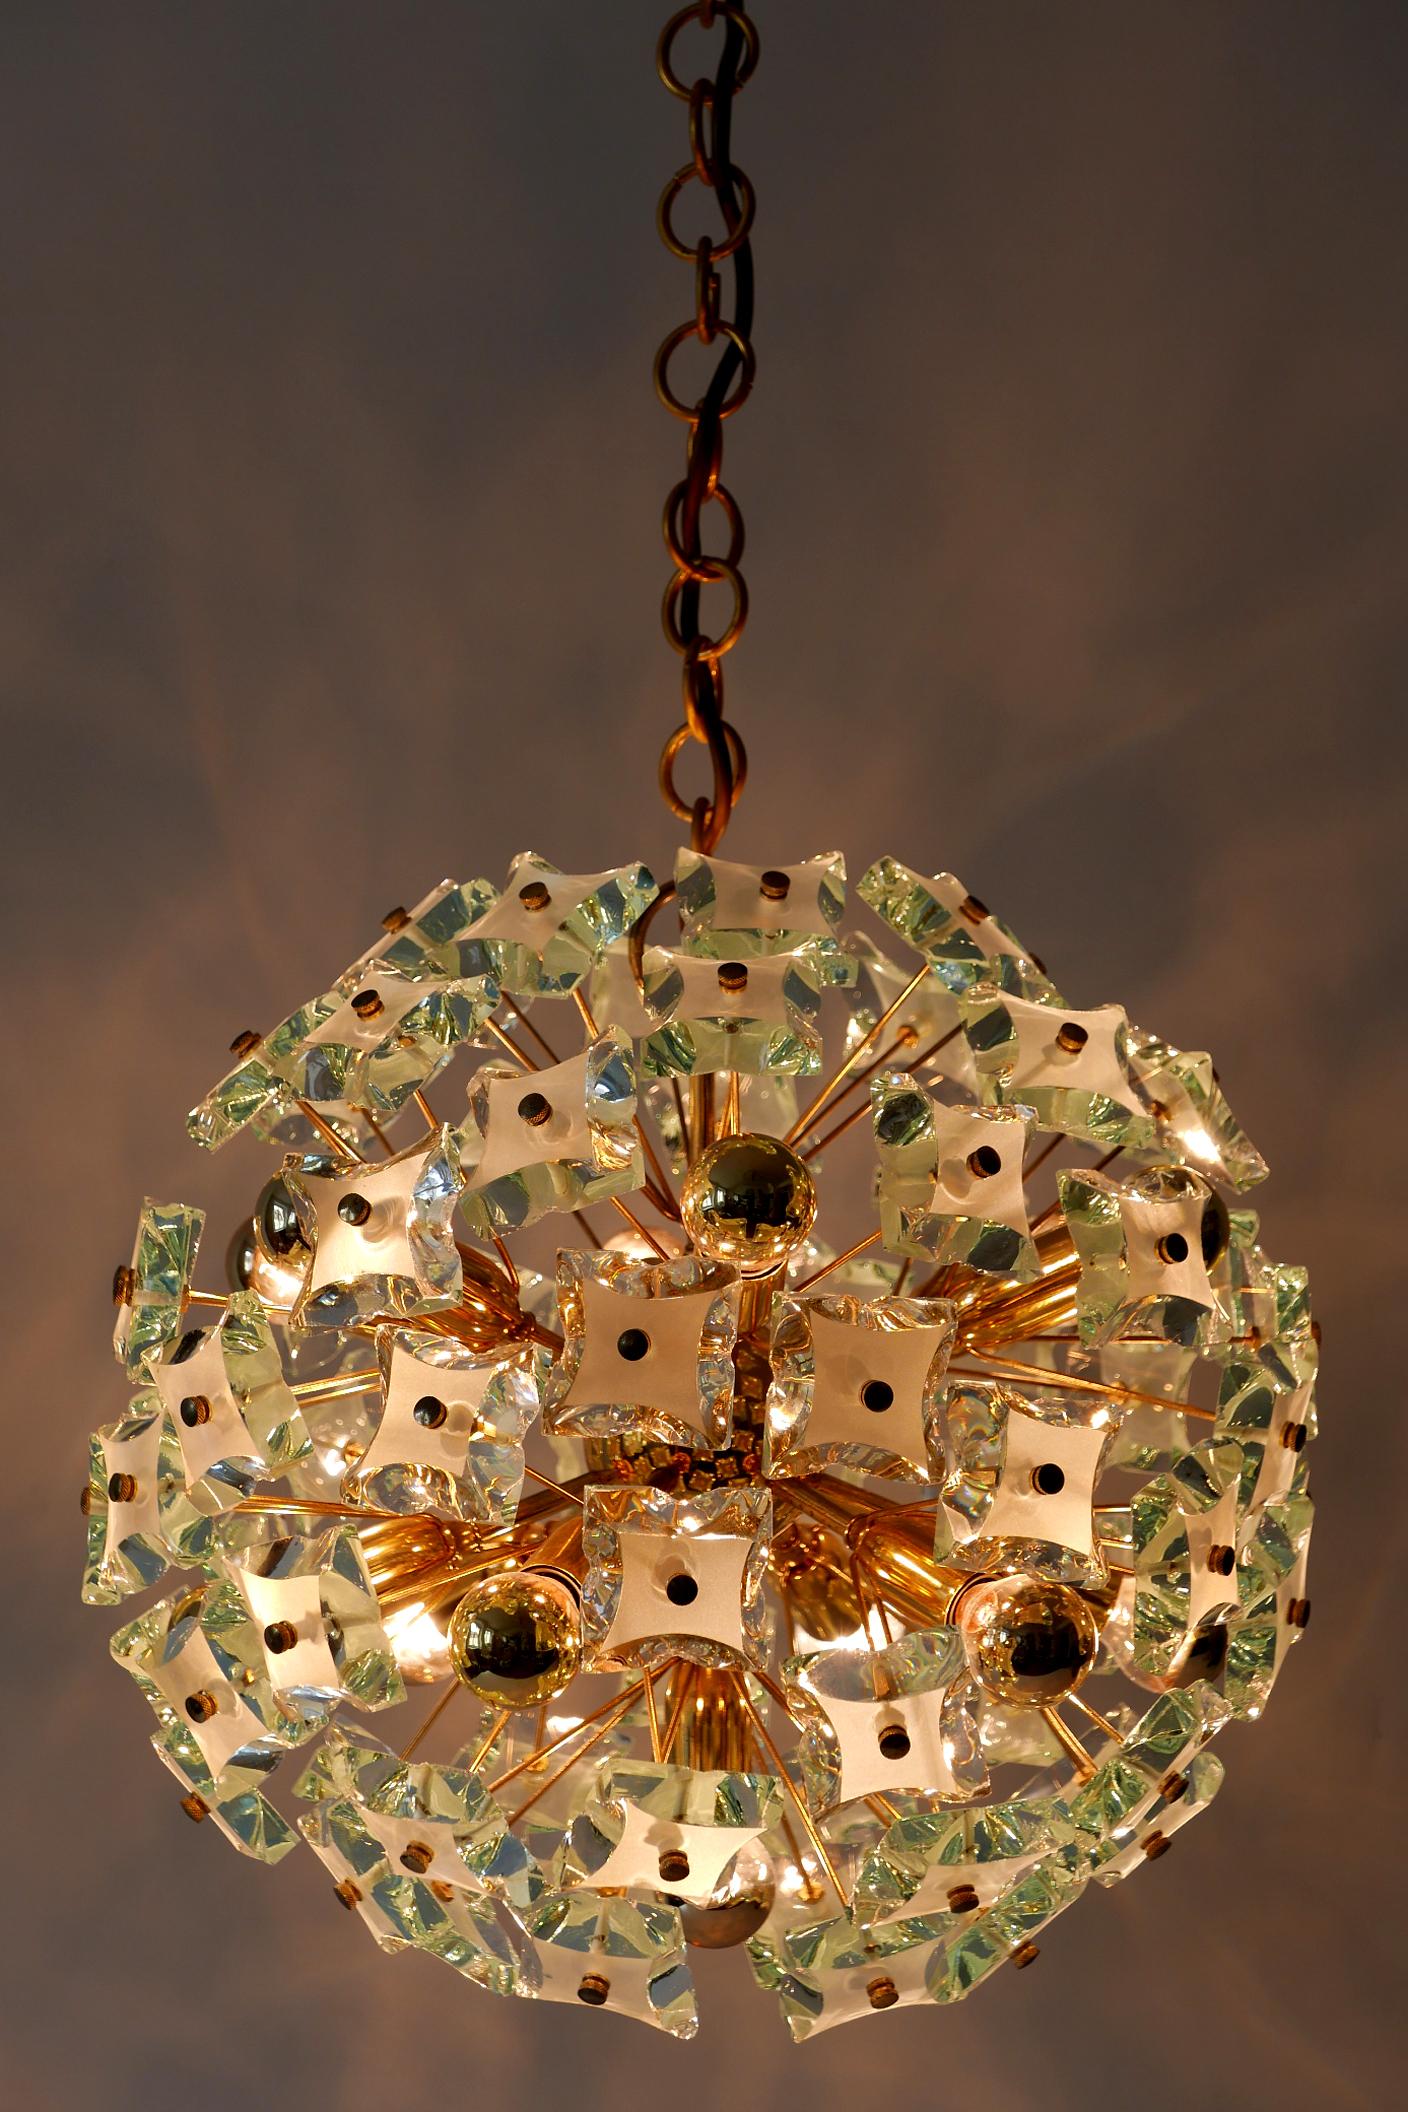 Amazing and highly decorative, elegant Mid-Century Modern Sputnik 13-flamed chandelier or pendant lamp 'Dandelion'. Manufactured probably by Fontana Arte in 1960s in Italy.

Executed in thick glass and brass, the chandelier / pendant lamp needs 13 x